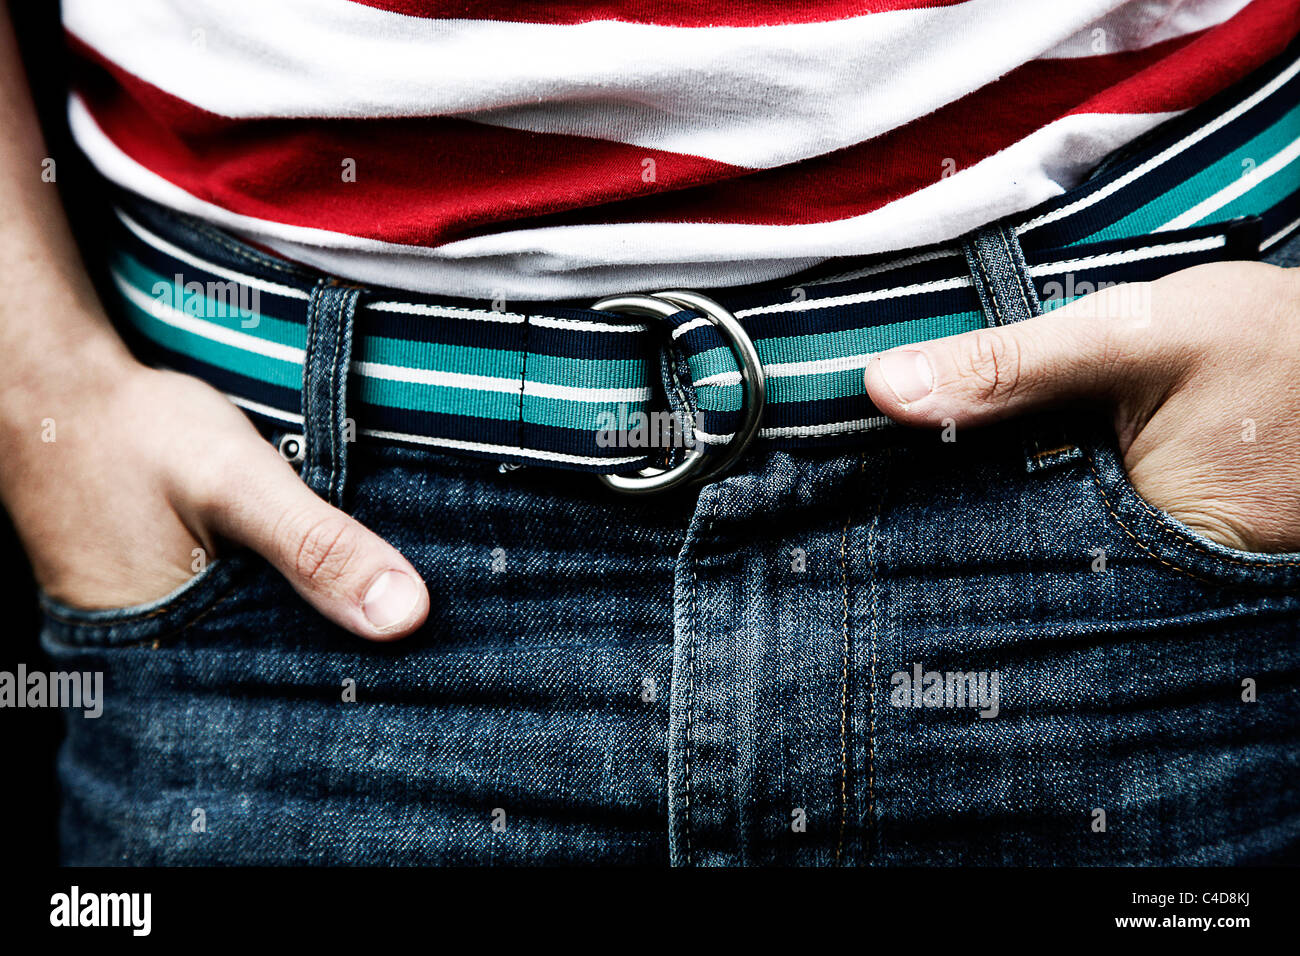 Man with his hands in his pockets wearing blue denim jeans trousers with a green, blue and white fashion belt Stock Photo